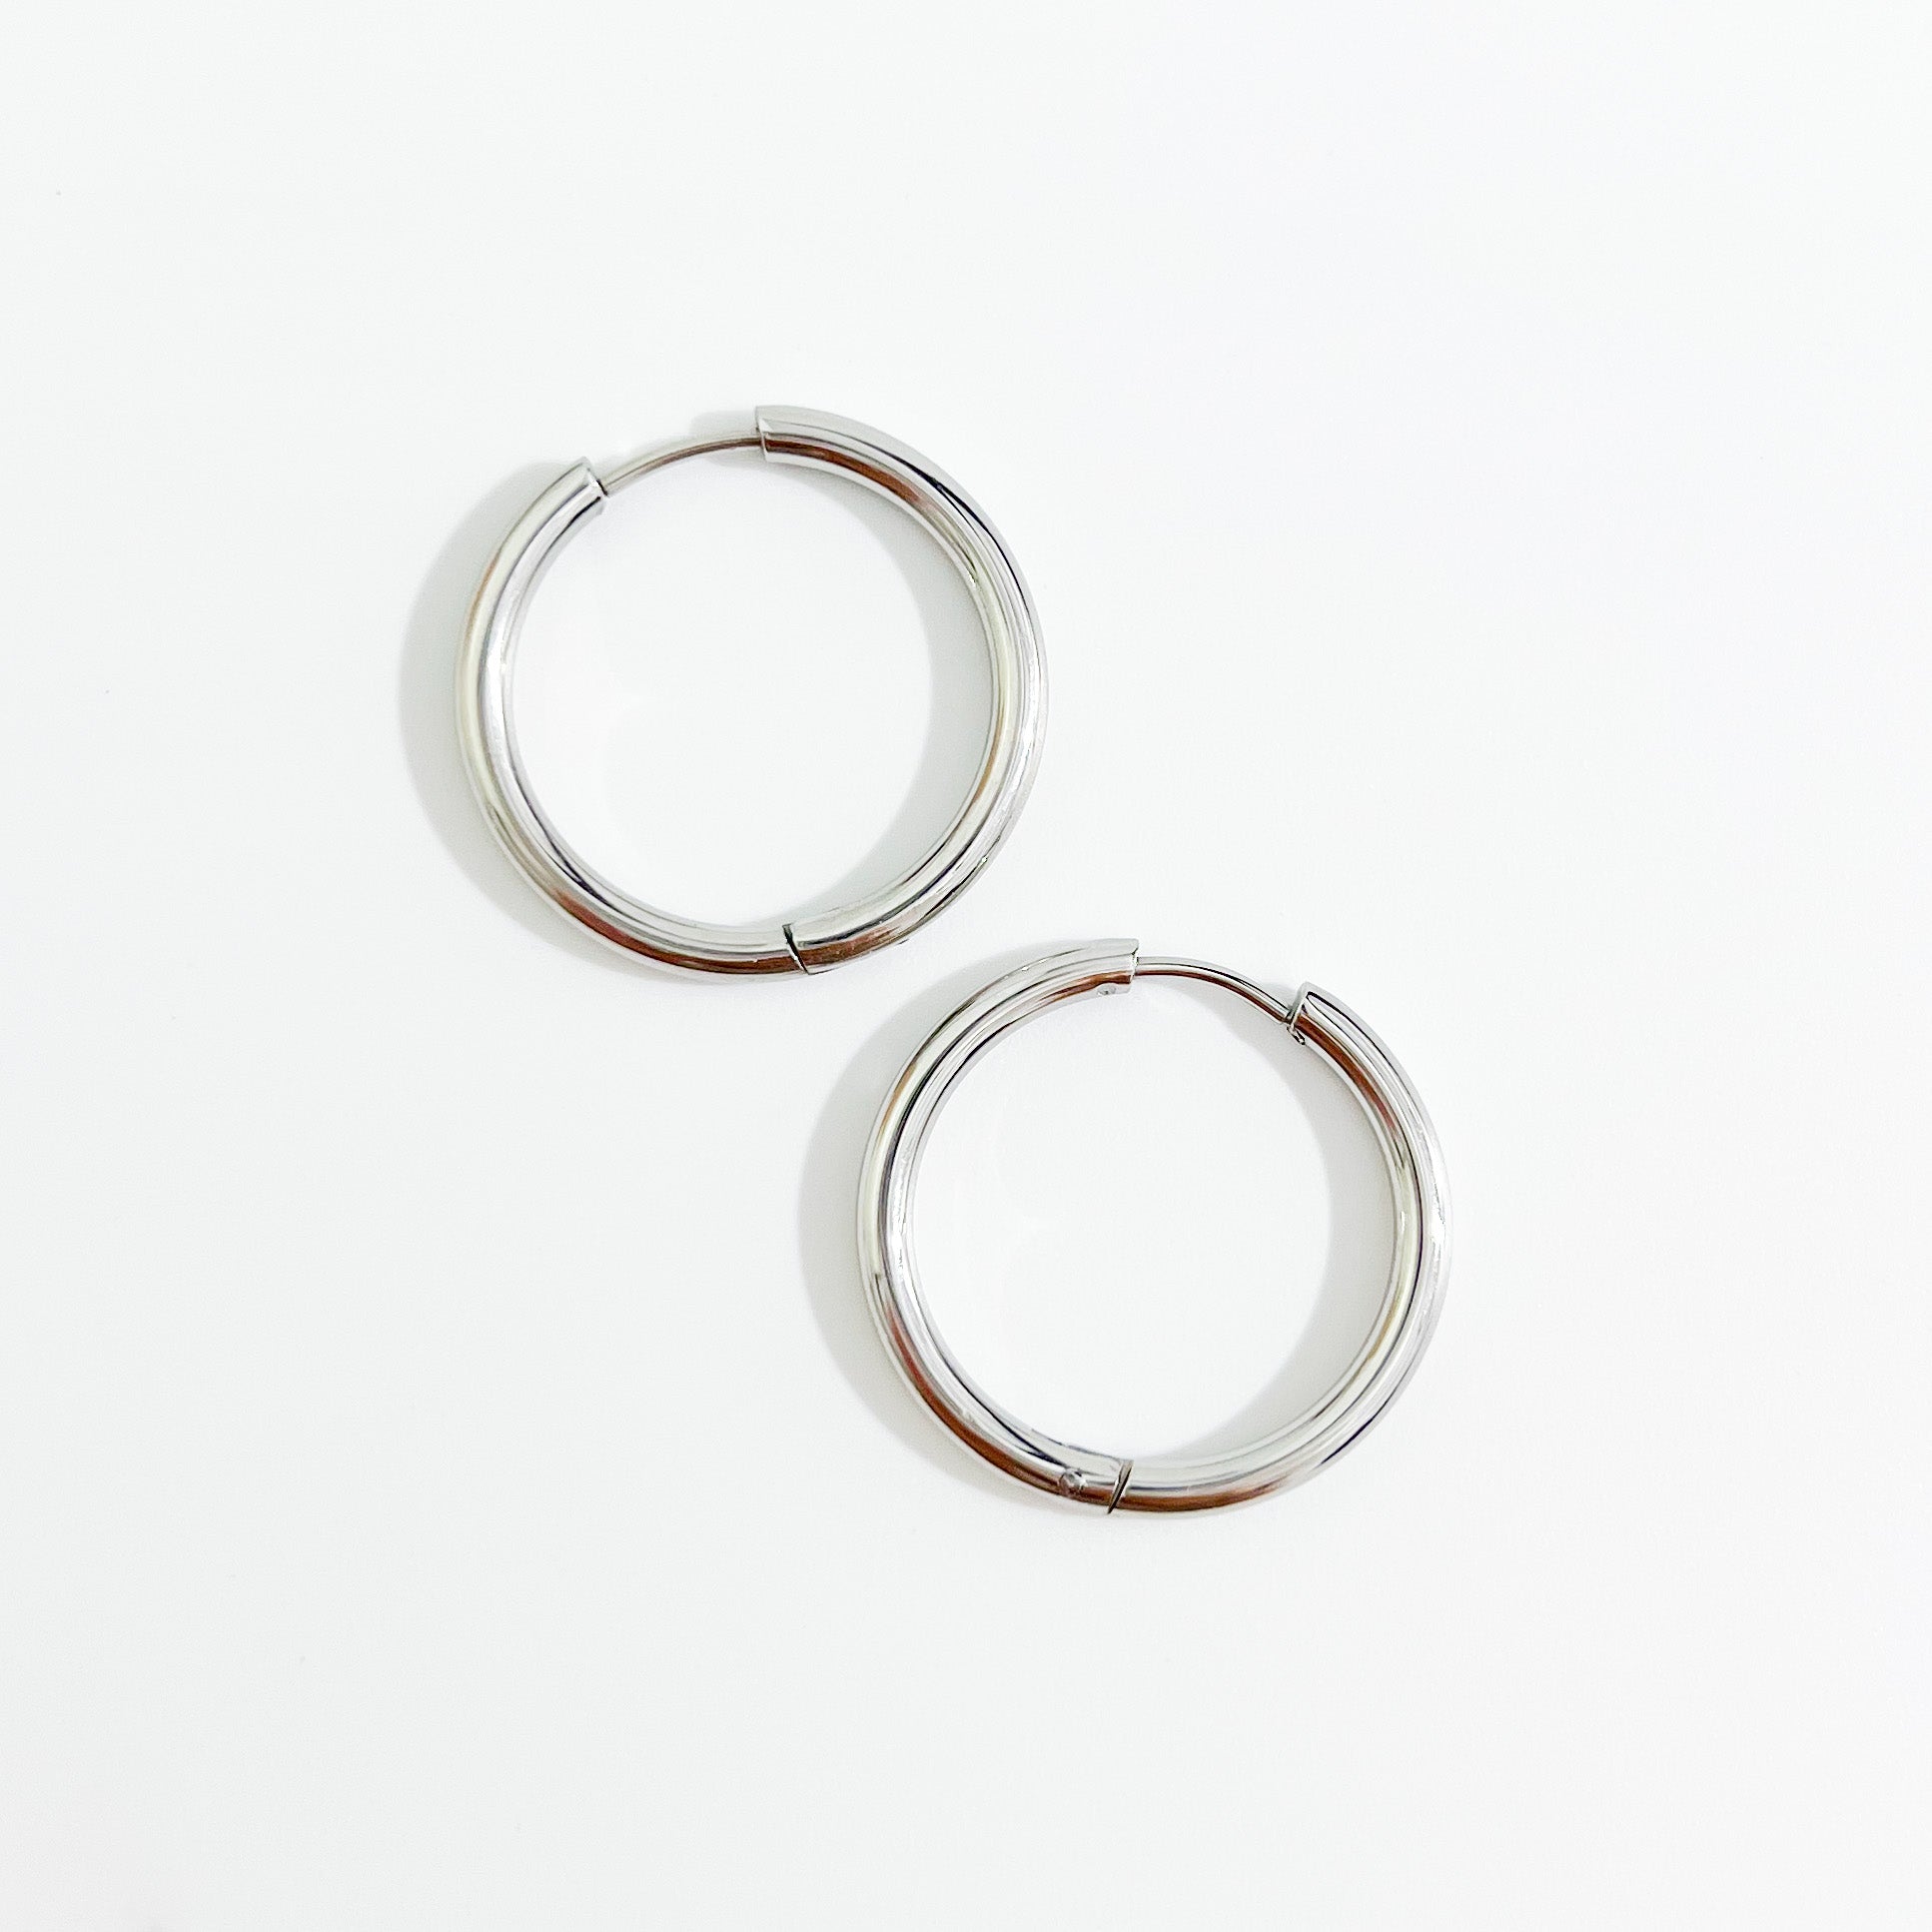 Regular Everyday Seamless Silver Hoops (2.5cm) - Flaire & Co.